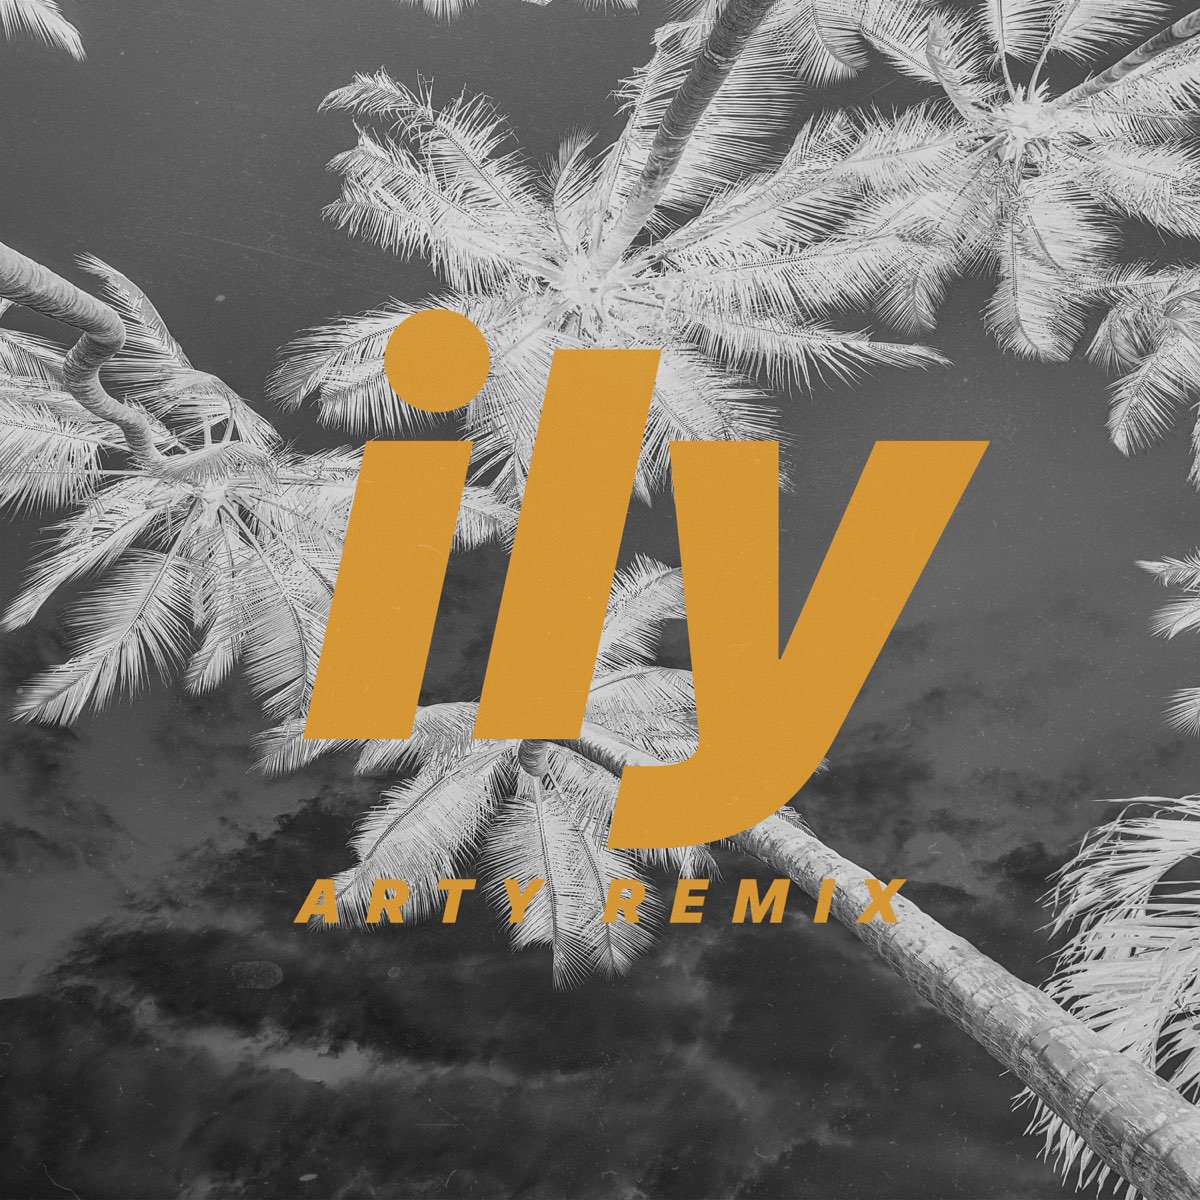 Ily I Love You Baby Arty Remix Feat Emilee Single By Surf Mesa On Apple Music